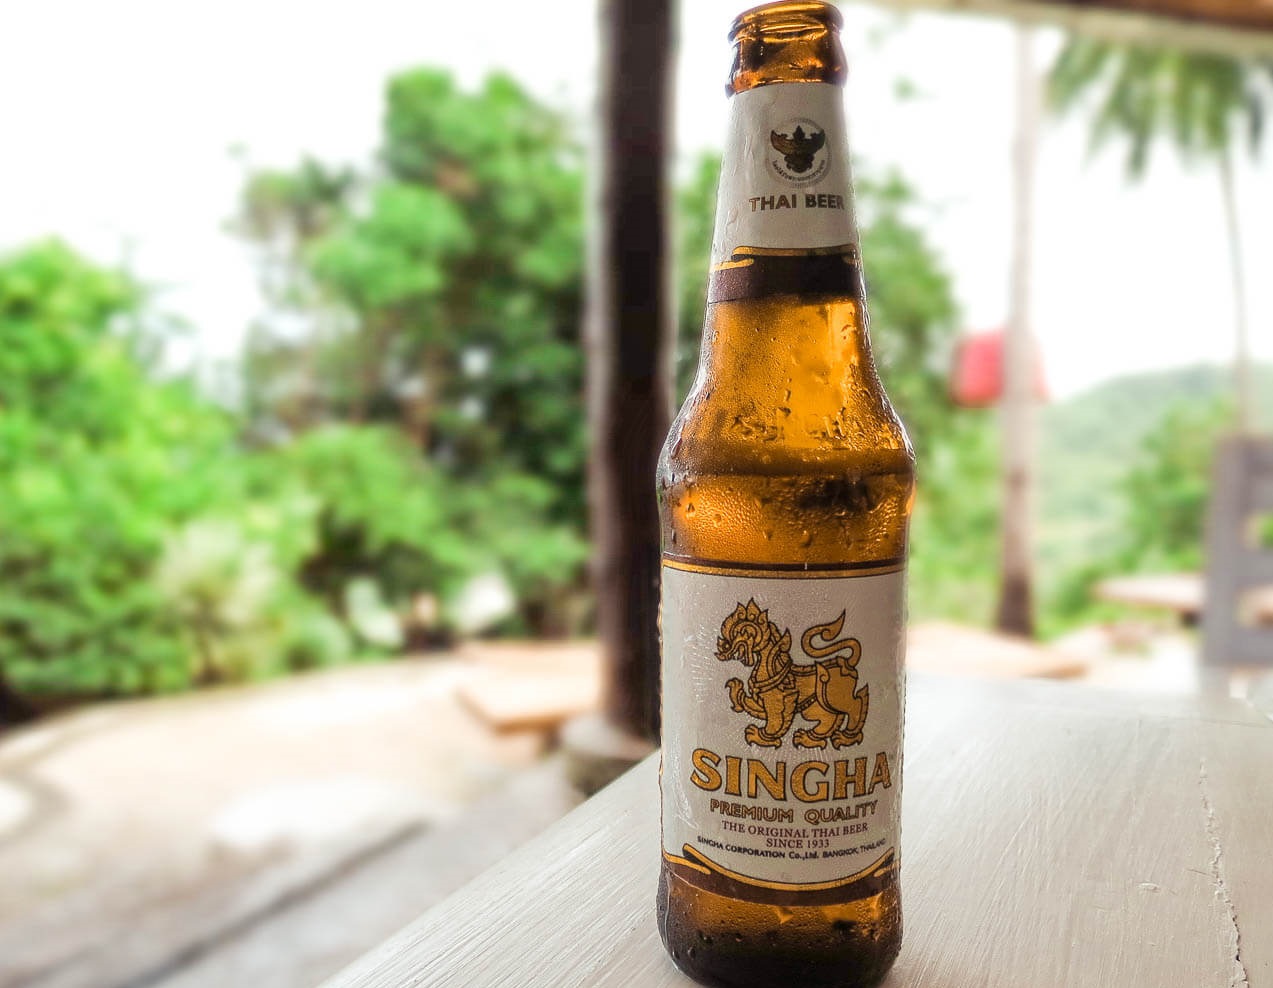 Thai Beer - 6 Drinks You Should Try In Thailand